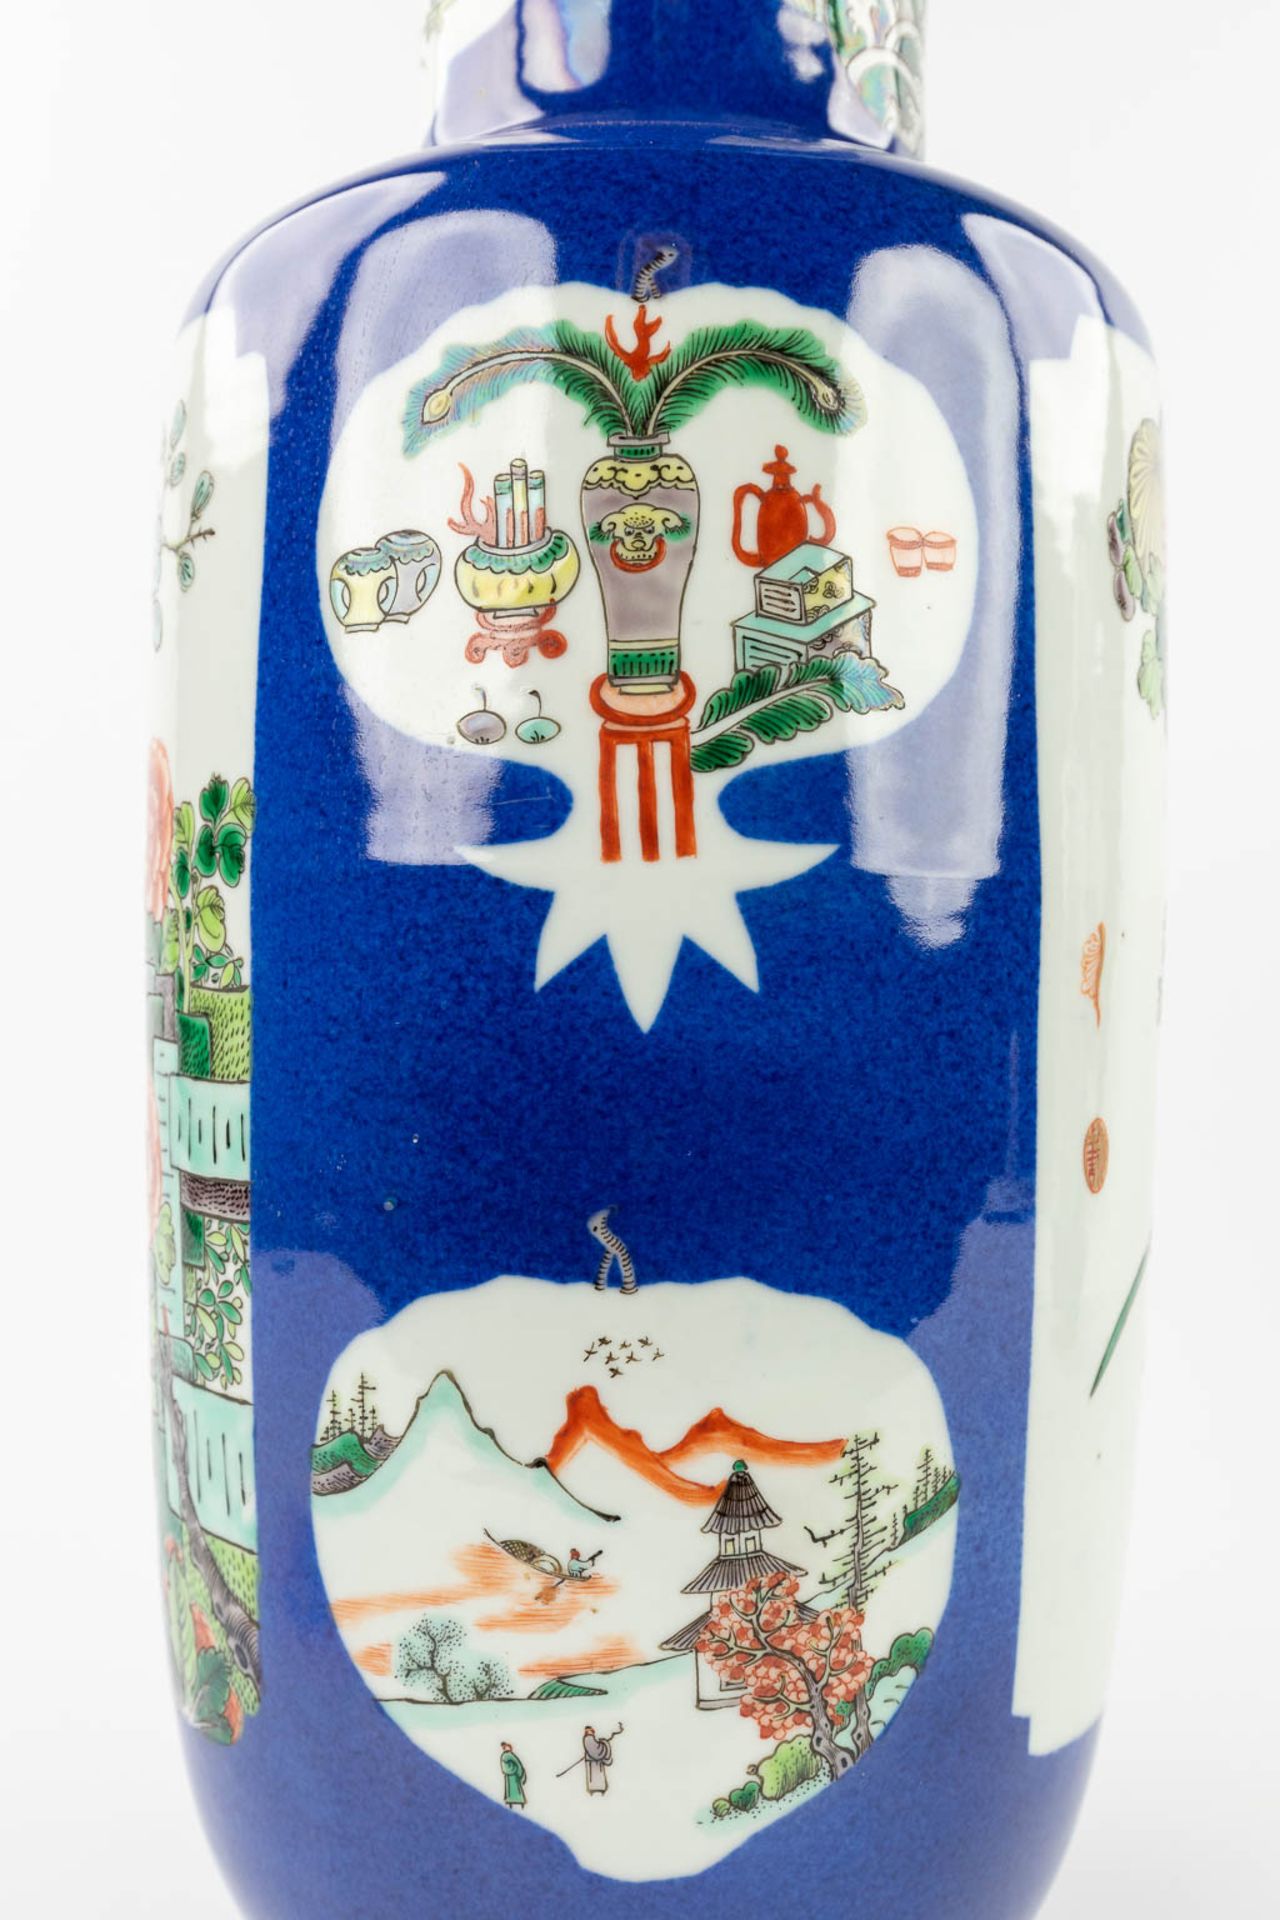 A pair of Chinese vases, decorated with fauna and flora. 20th C. (H:45 x D:18 cm) - Image 10 of 13